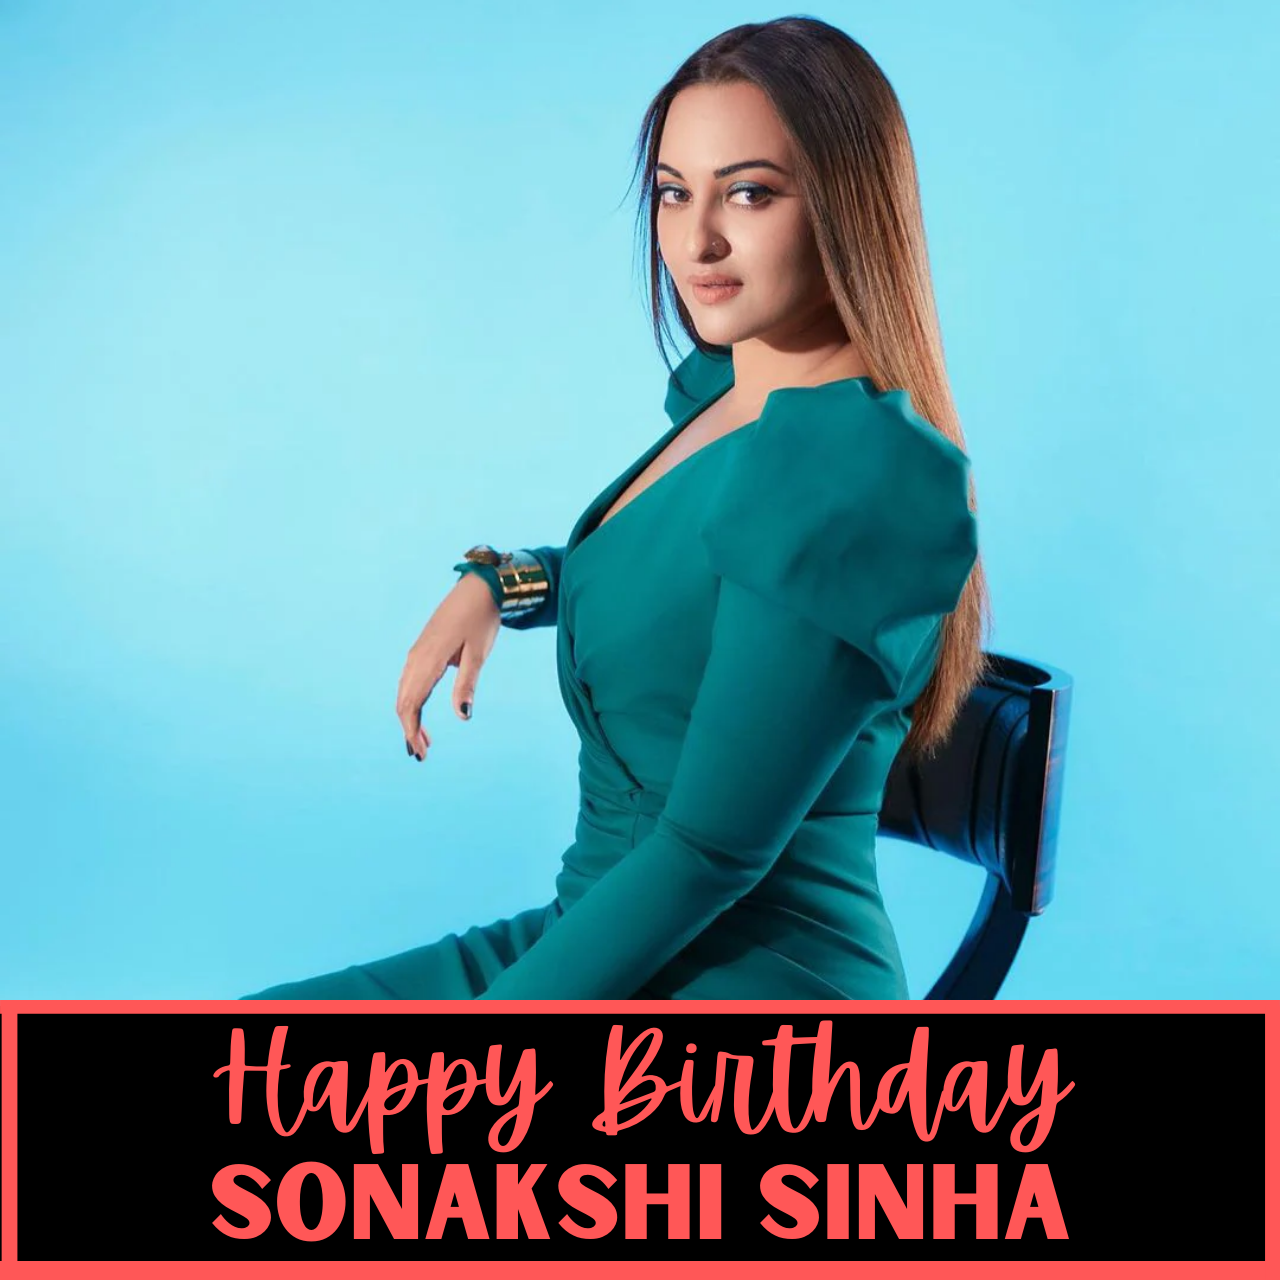 Happy Birthday Sonakshi Sinha: Quotes, Wishes, Images, Messages, and Greetings to greet 'Dabangg Girl'